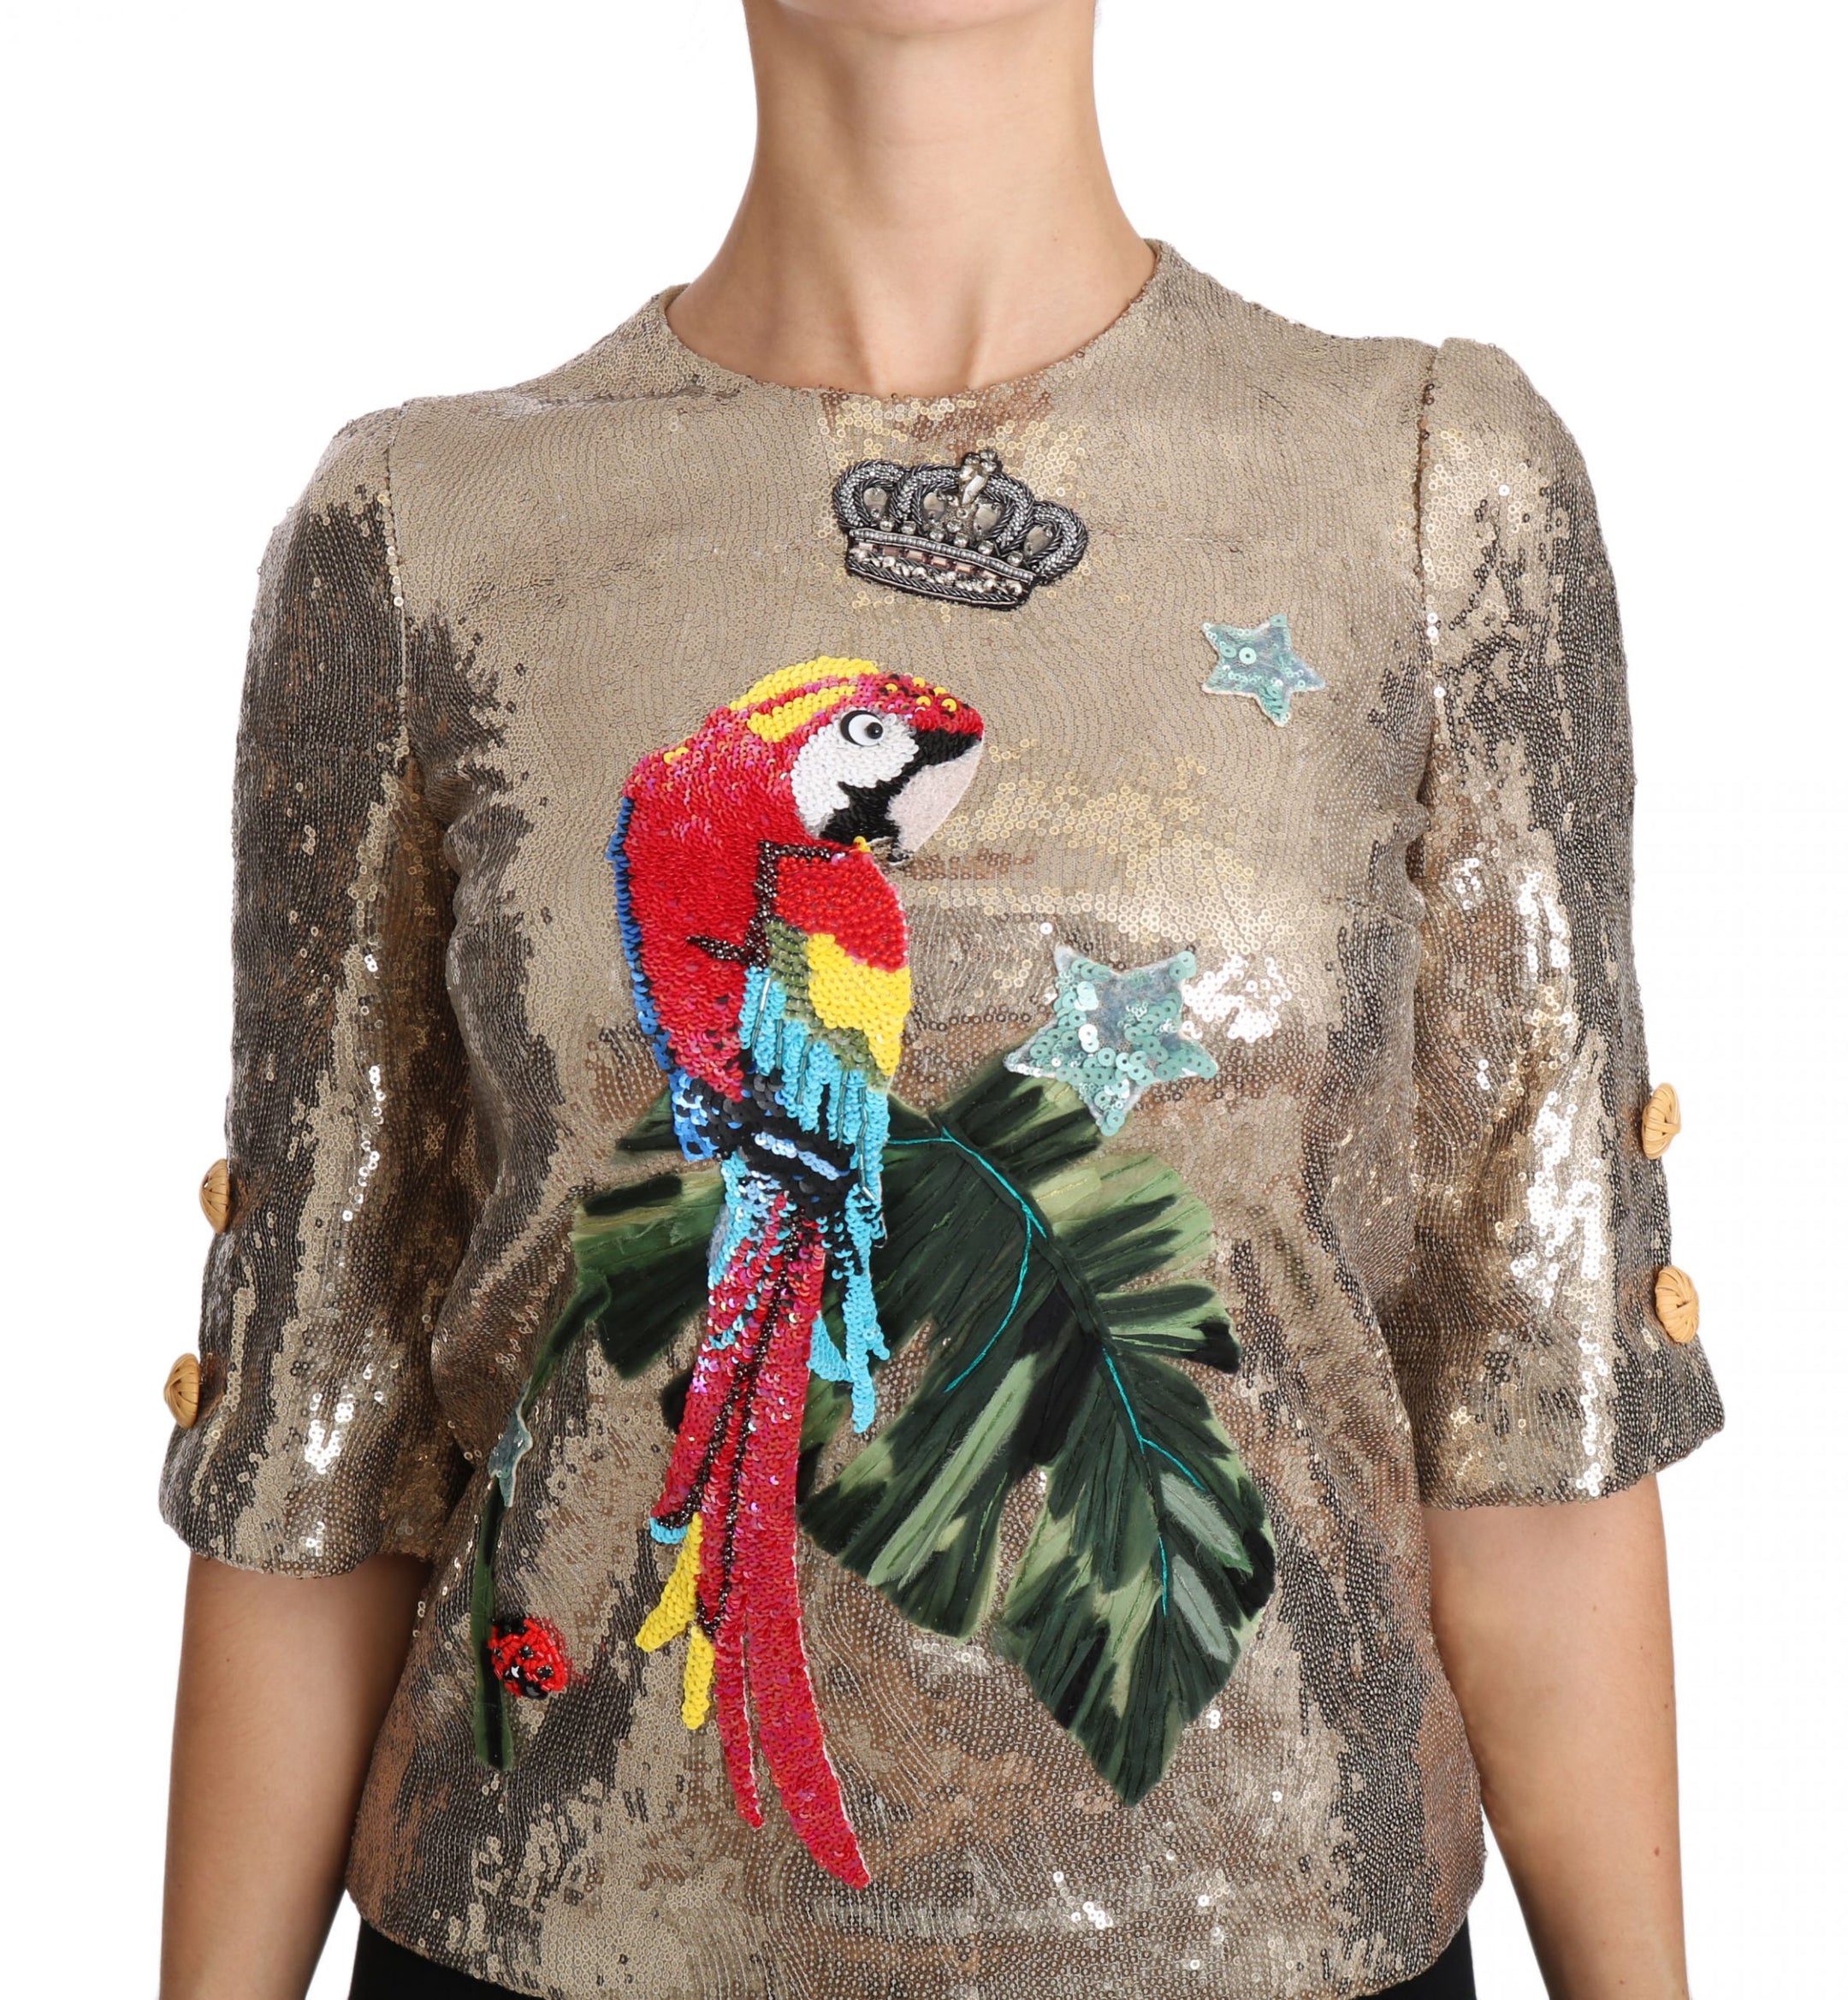 Buy Gold Sequined Parrot Crystal Blouse by Dolce & Gabbana